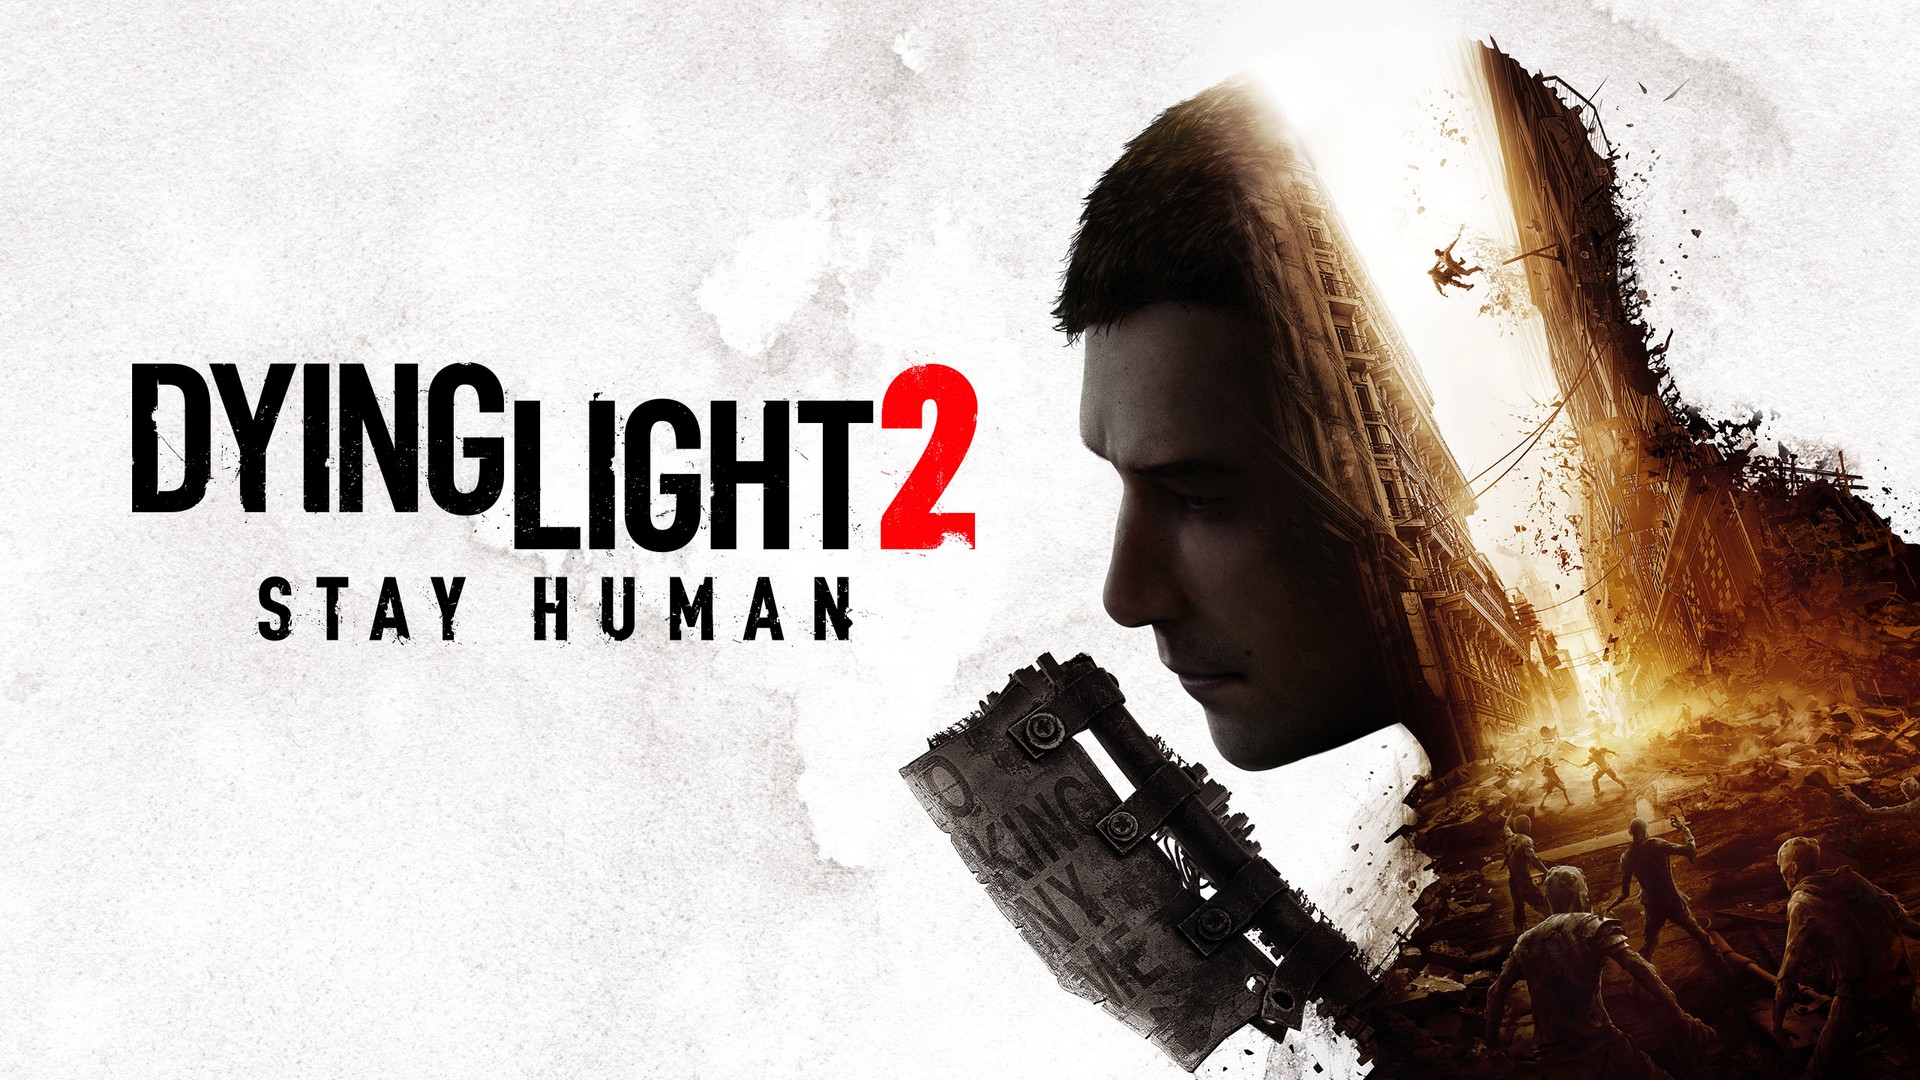 5 Million Copies Of Dying Light 2 Stay Human Sold In February, First Dying Light Hits 20 Million